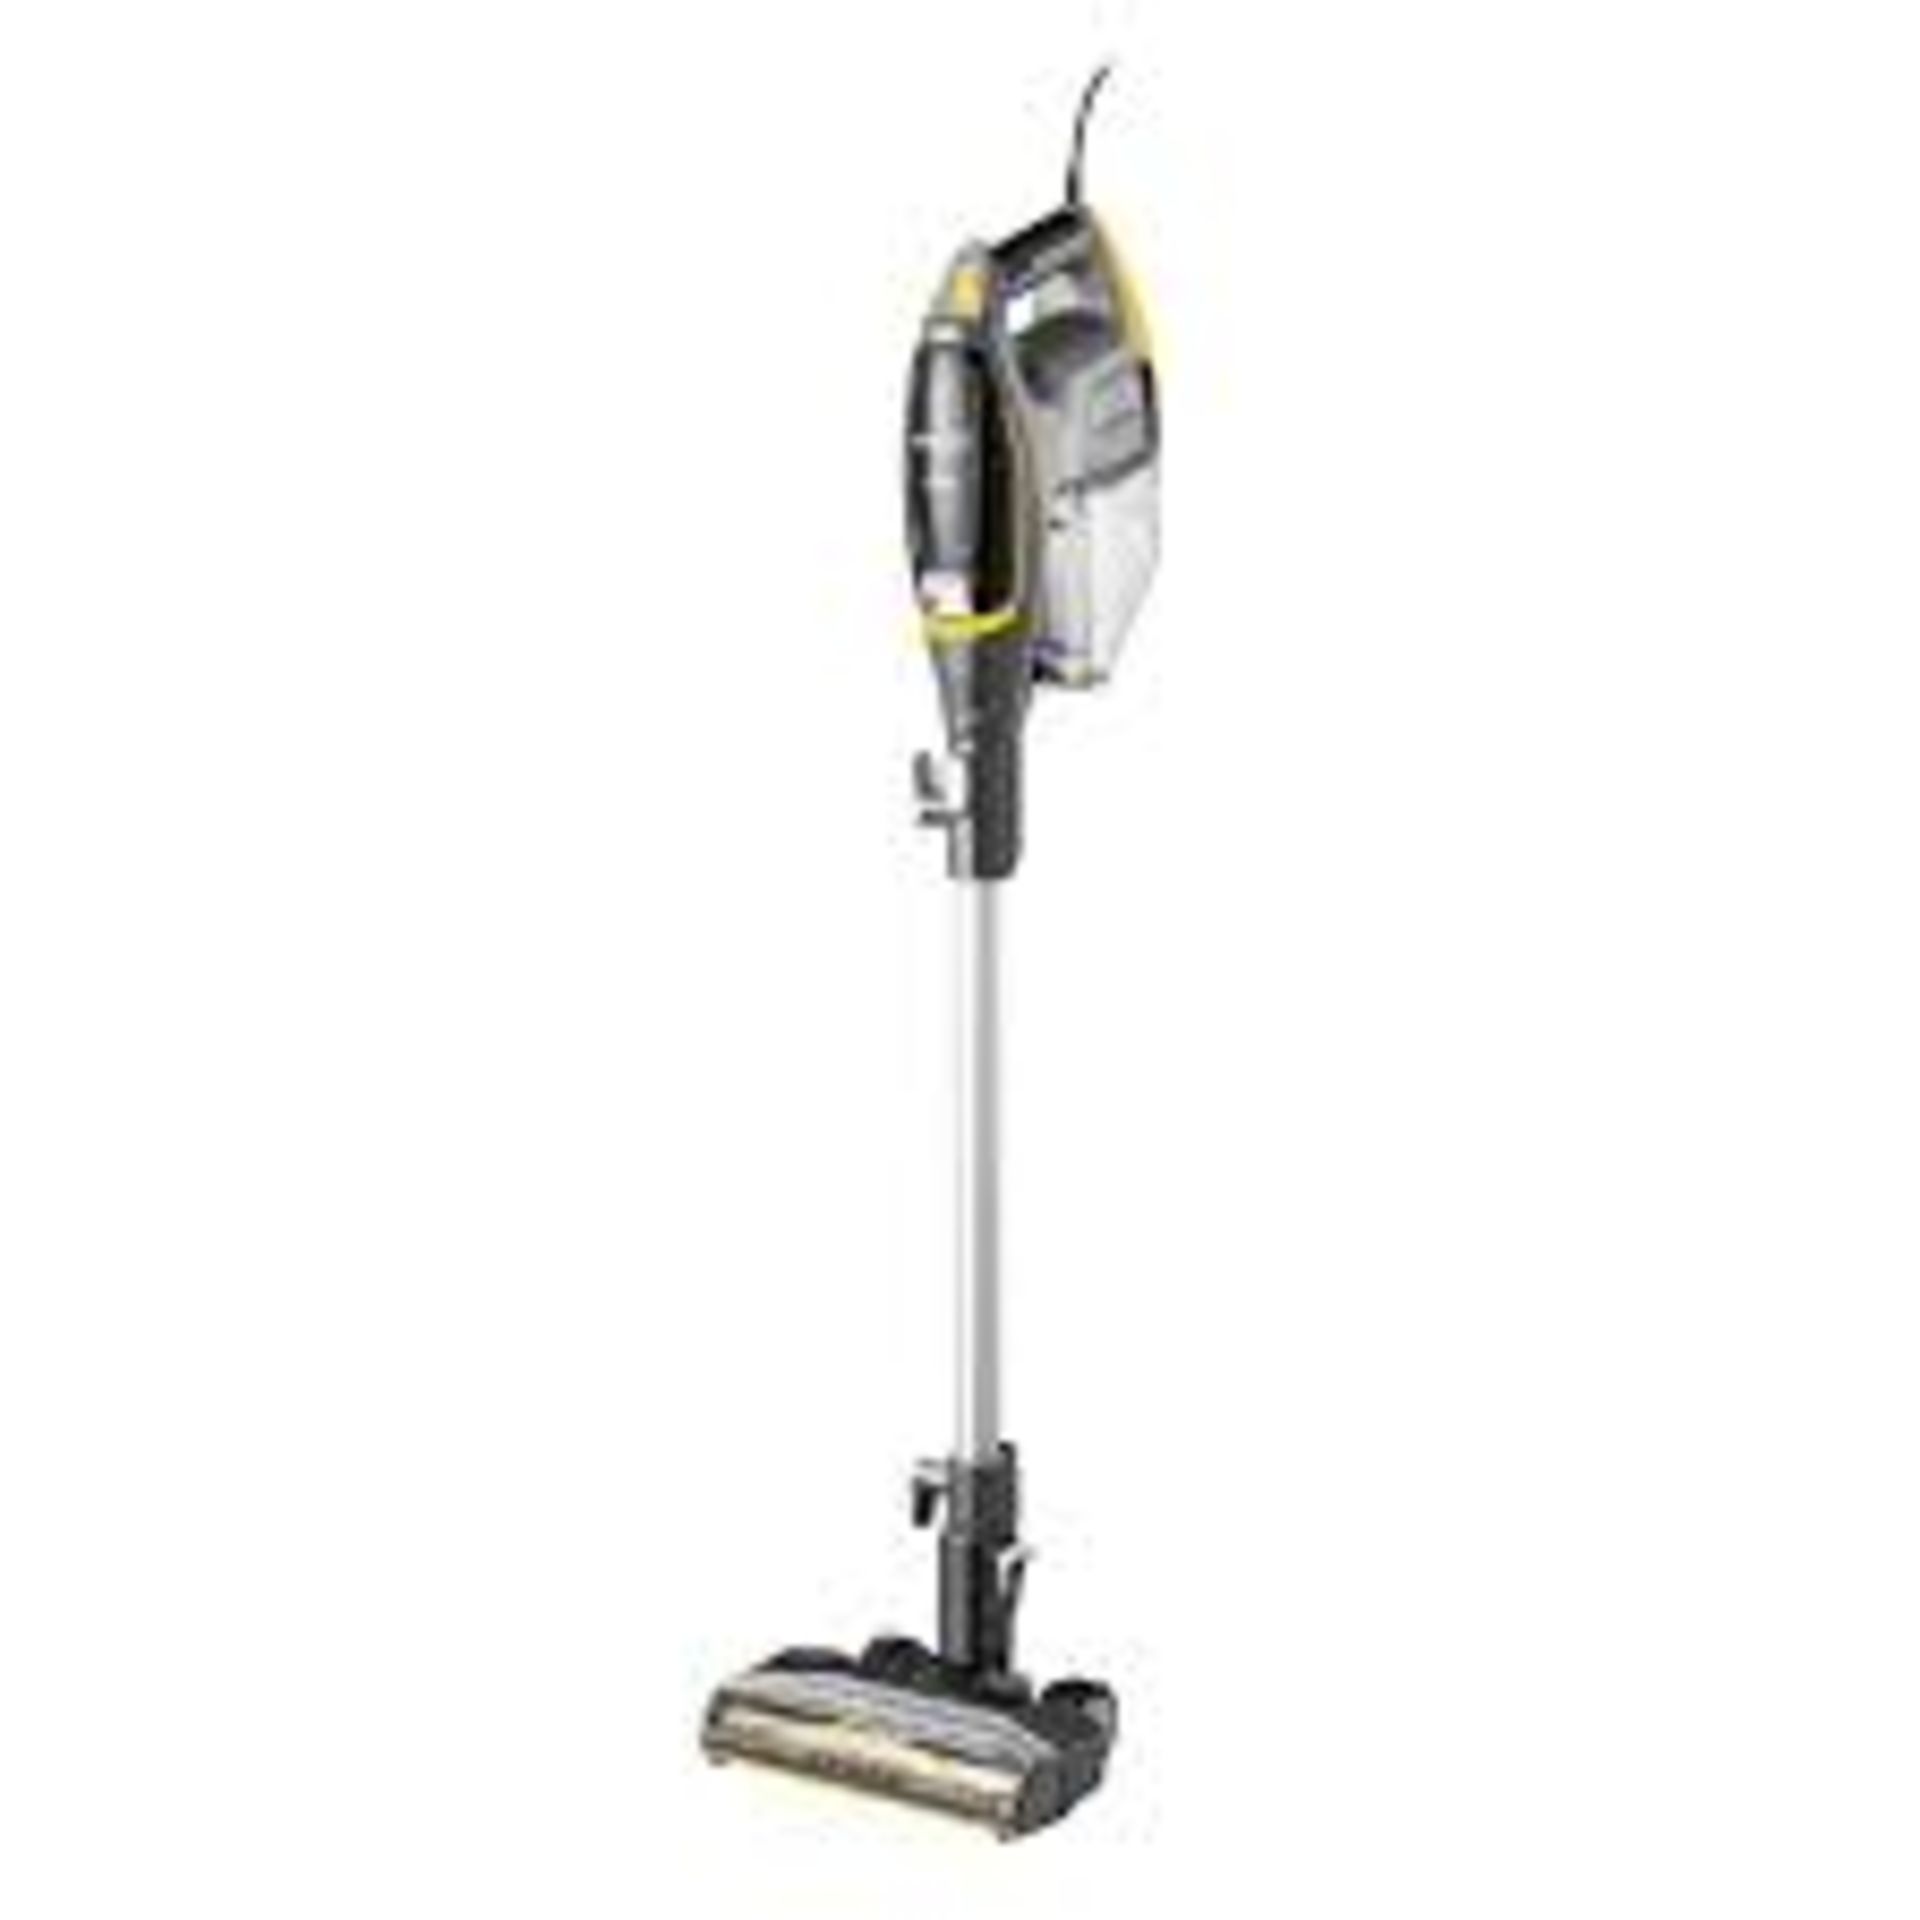 3 X BRAND NEW Eureka NES510 2-in-1 Corded Stick & Handheld Vacuum Cleaner, 400W Motor for Whole - Image 2 of 2